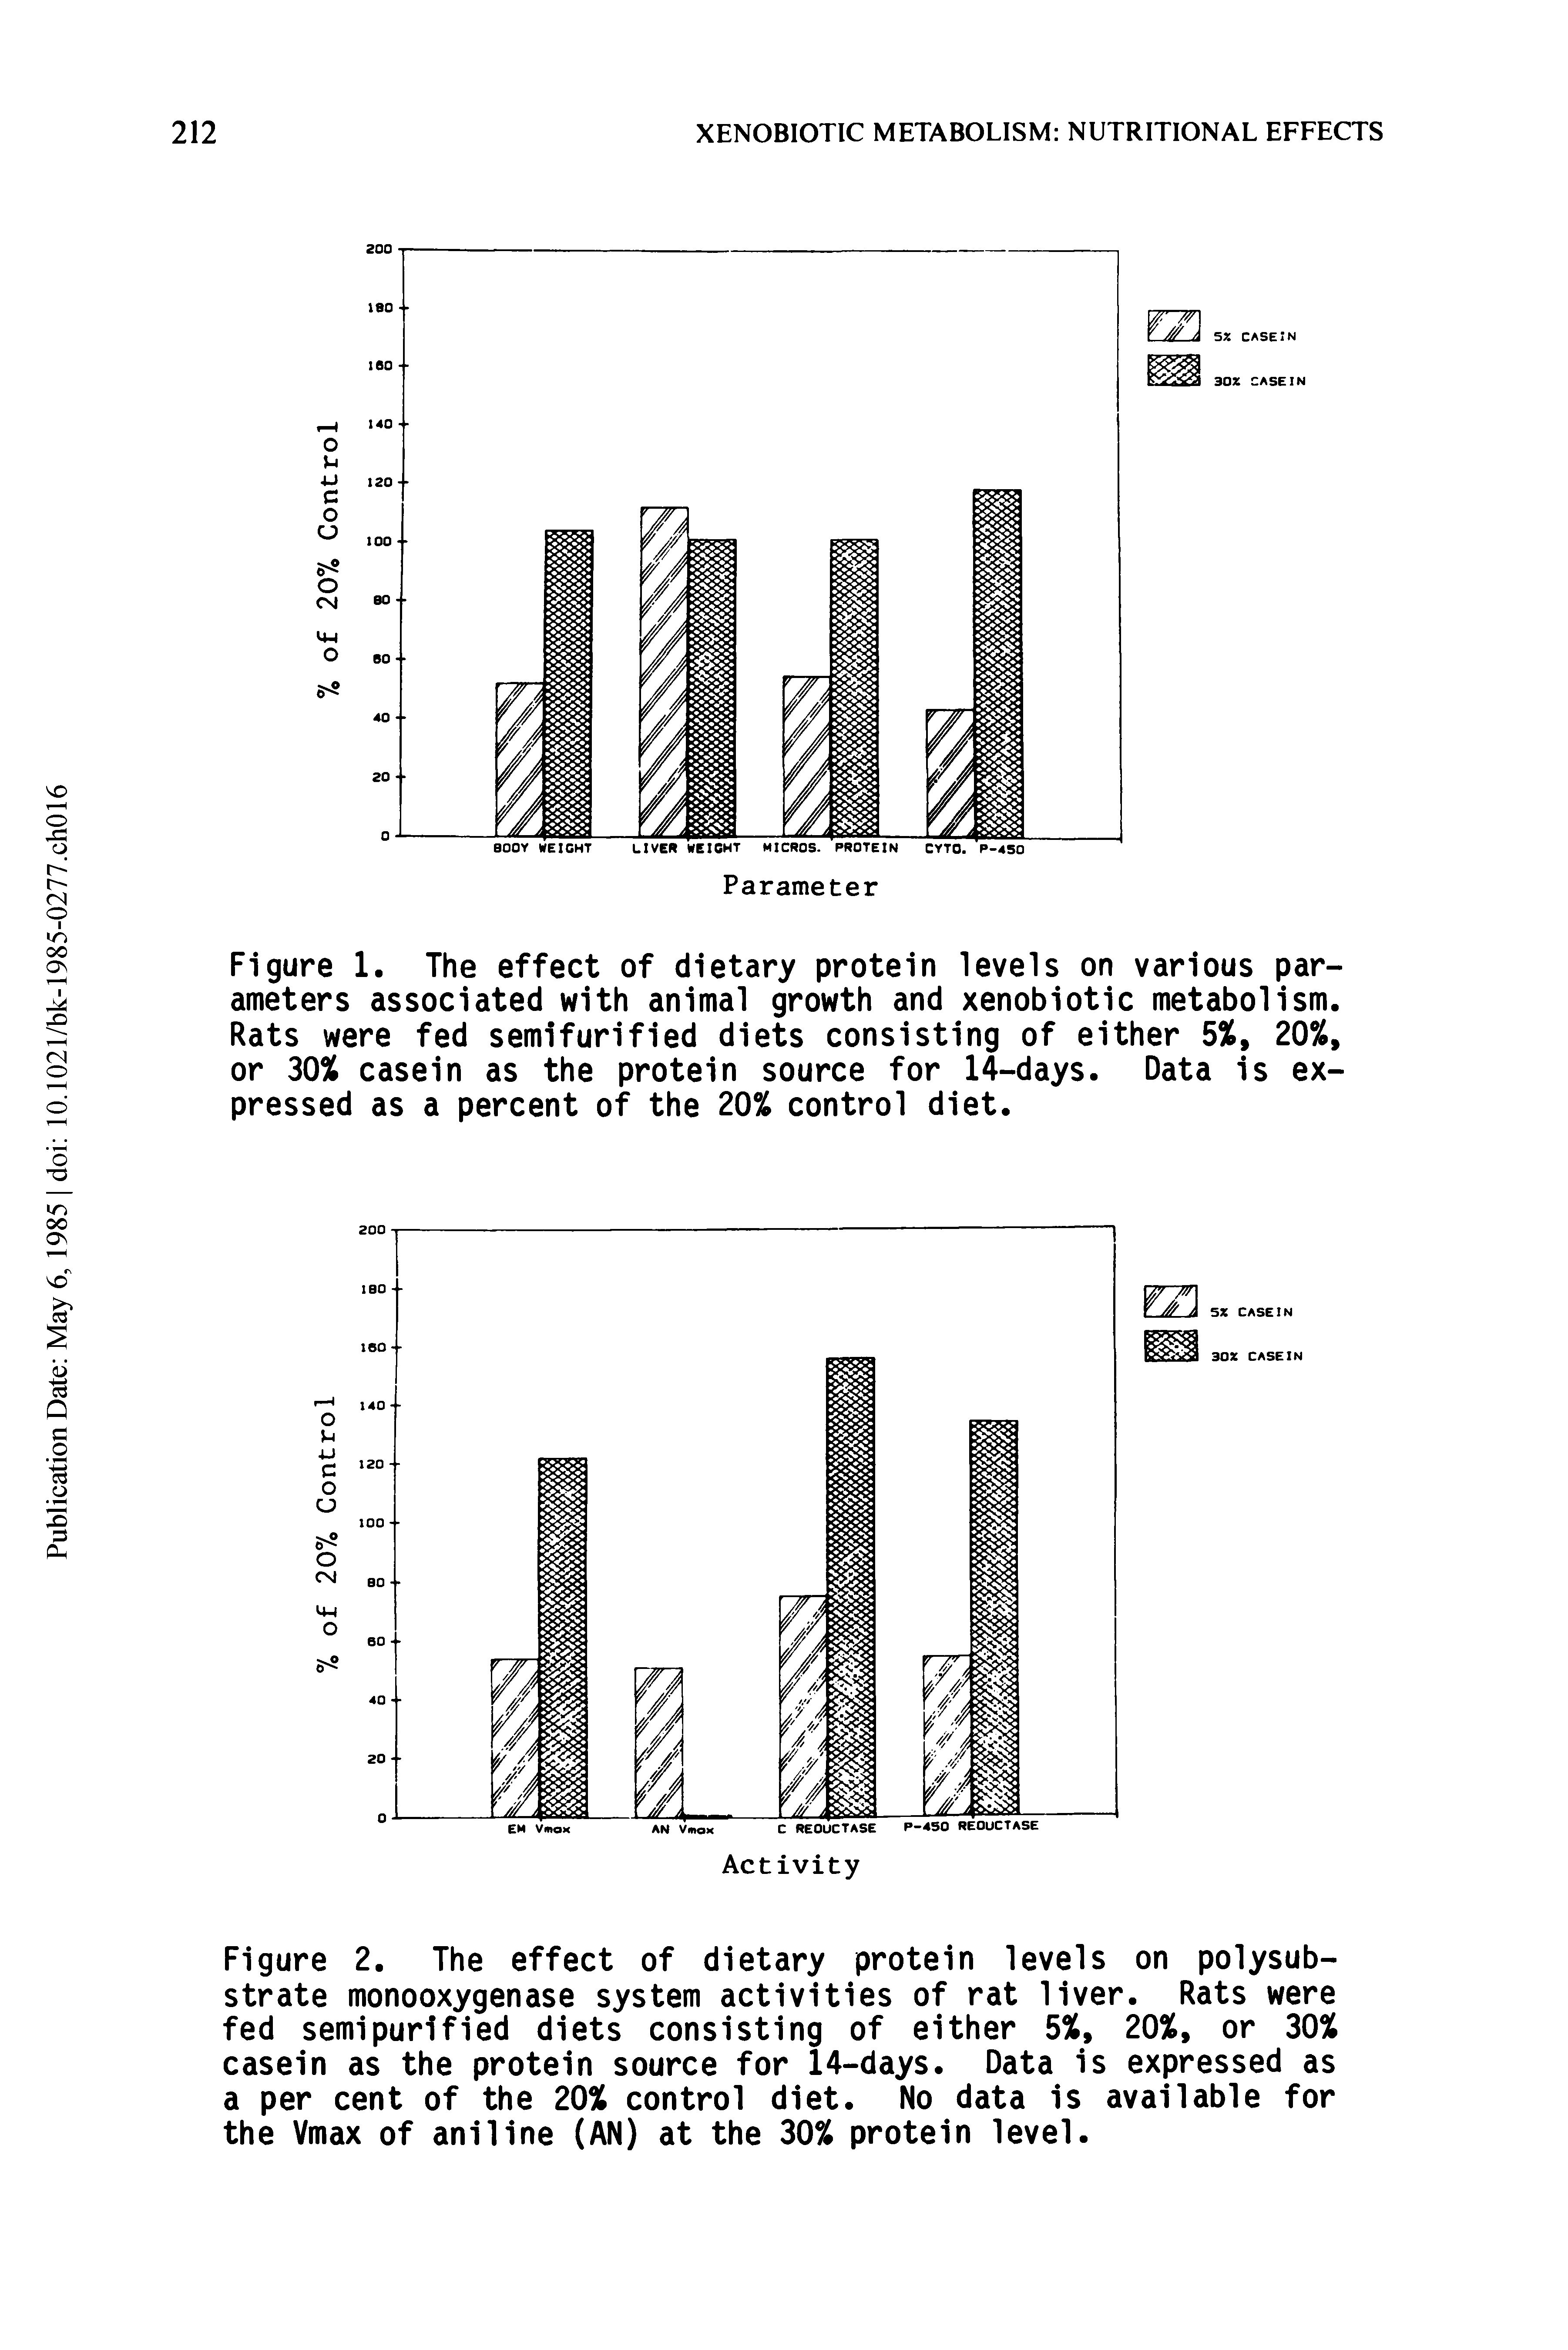 Figure 1. The effect of dietary protein levels on various parameters associated with animal growth and xenobiotic metabolism. Rats were fed semifurified diets consisting of either 5%, 20%, or 30% casein as the protein source for 14-days. Data is expressed as a percent of the 20% control diet.